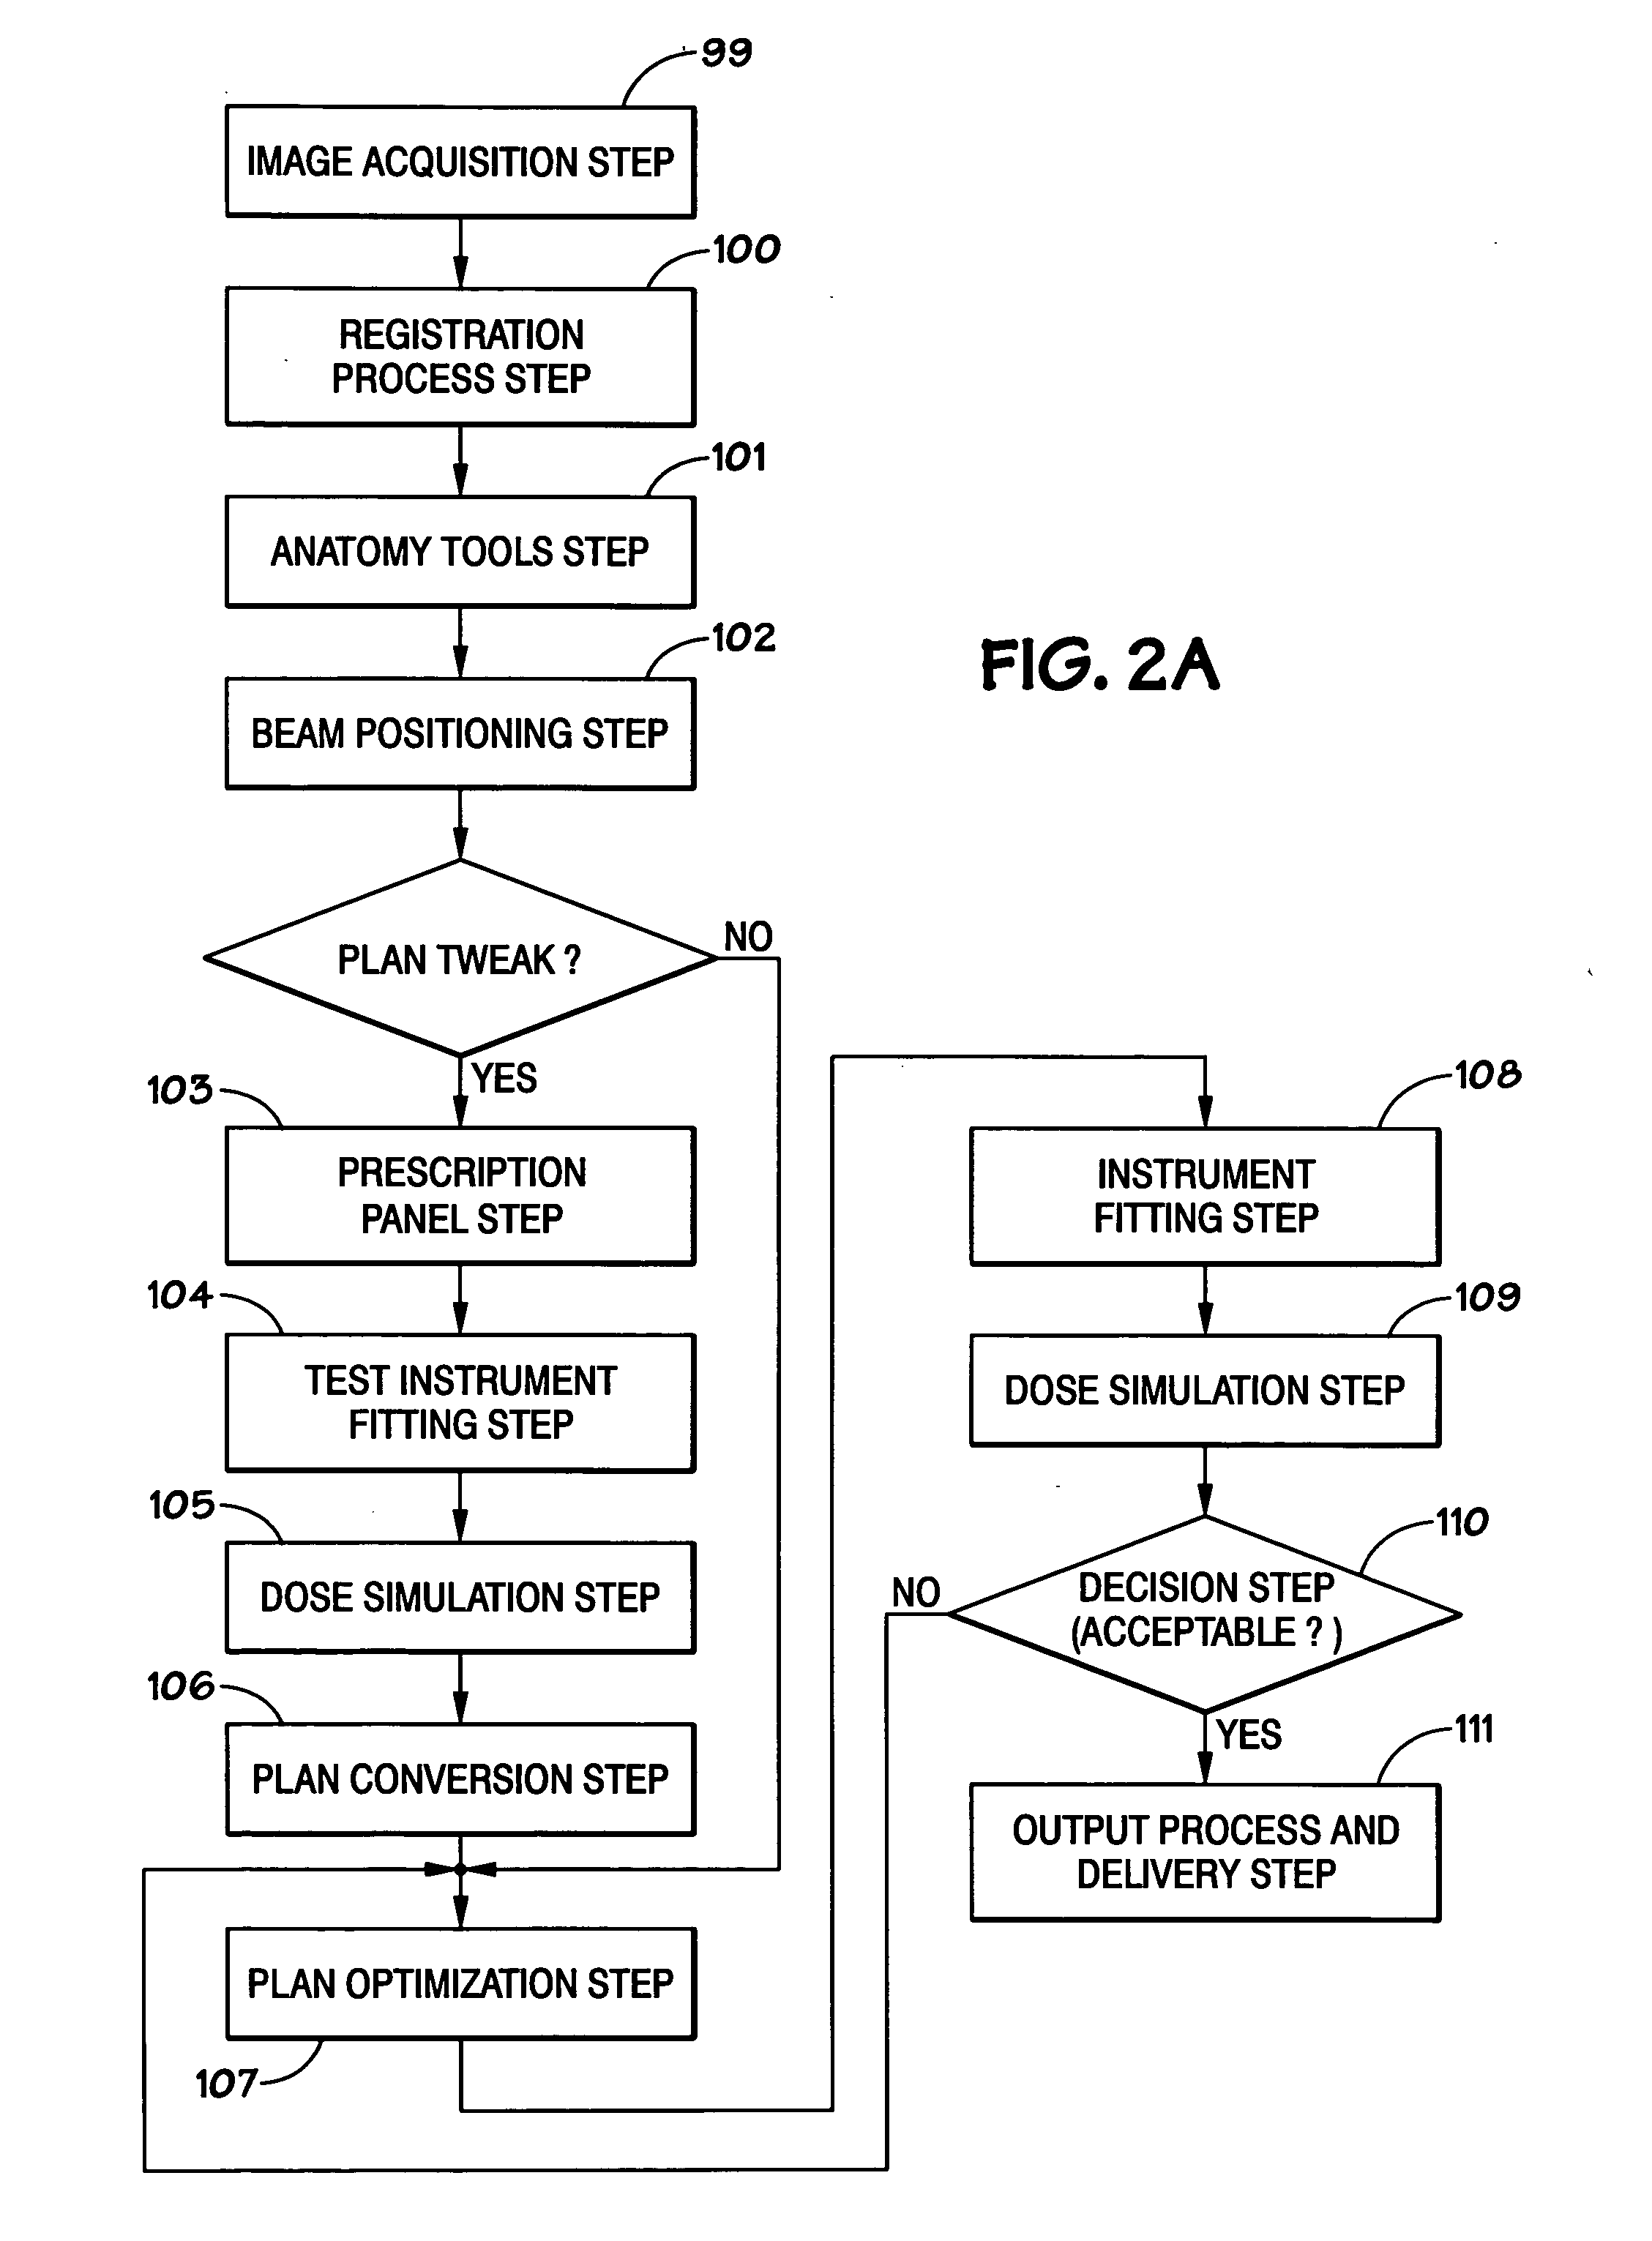 Planning system, method and apparatus for conformal radiation therapy